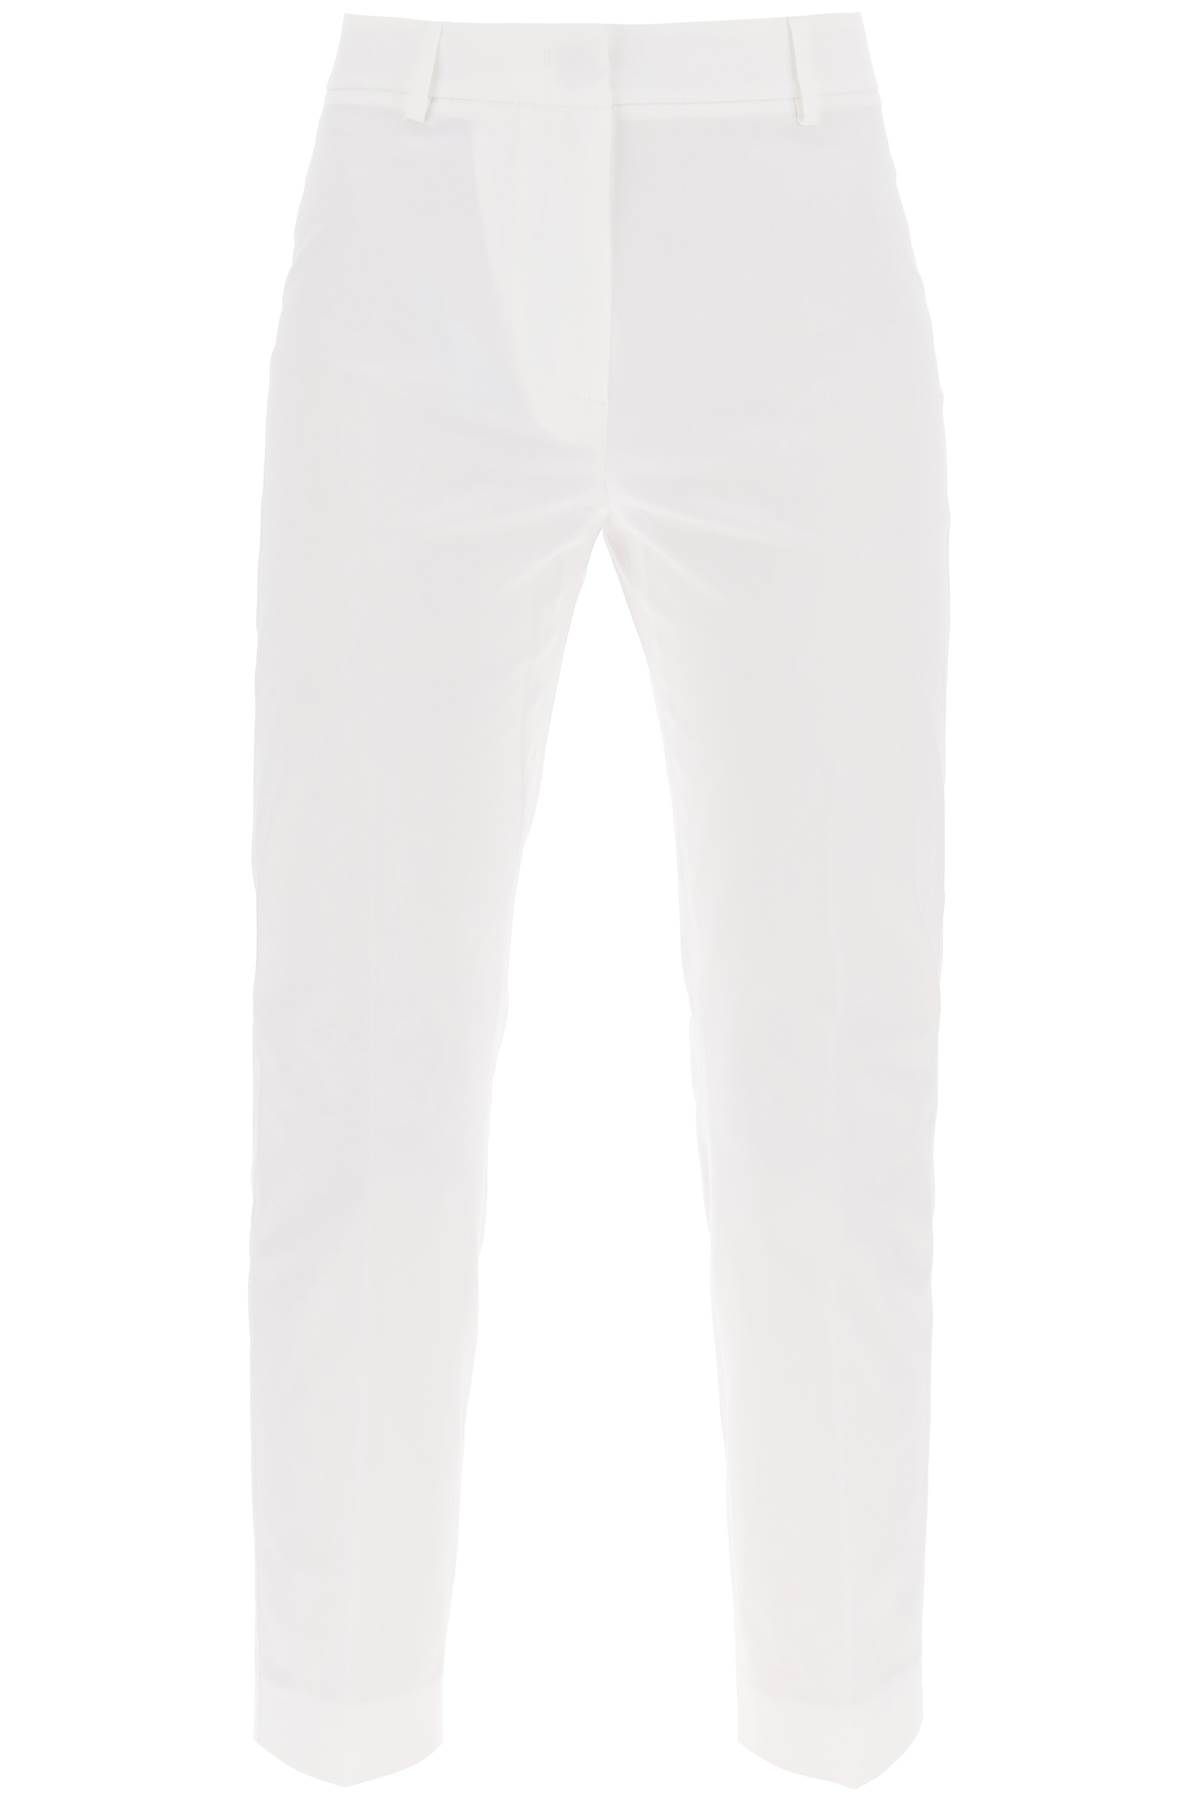 Weekend Max Mara 'cecil' Stretch Cotton Cigarette Pants In White